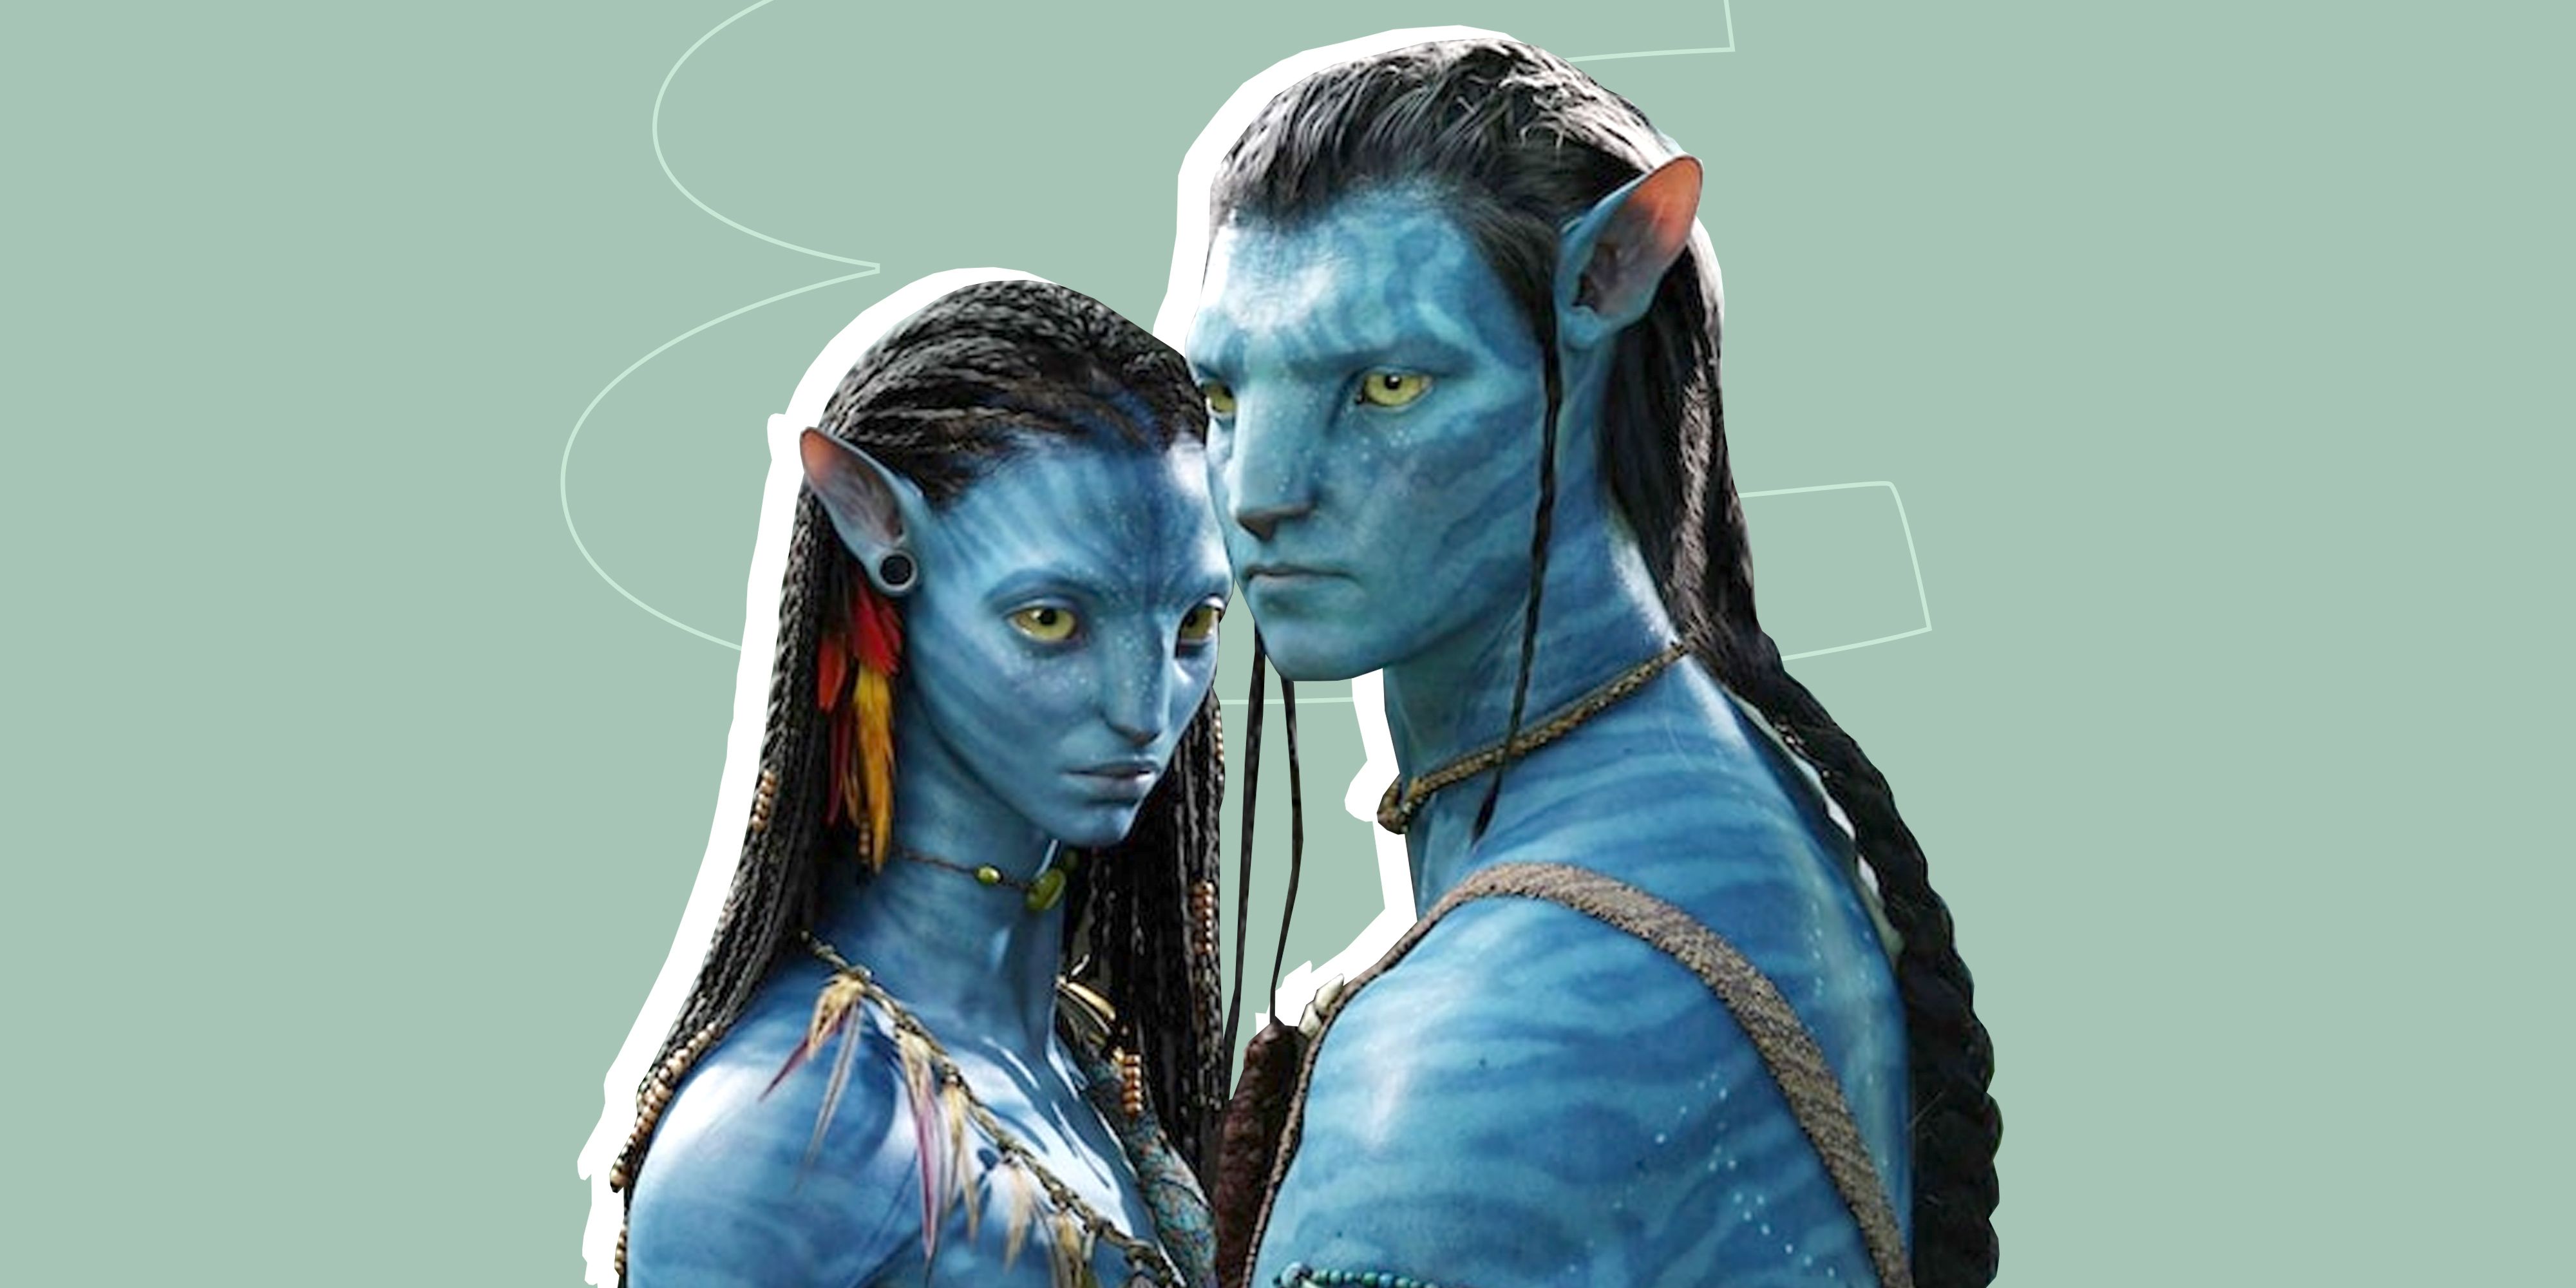 Avatar Makes Movie History Thanks to 3D Technology